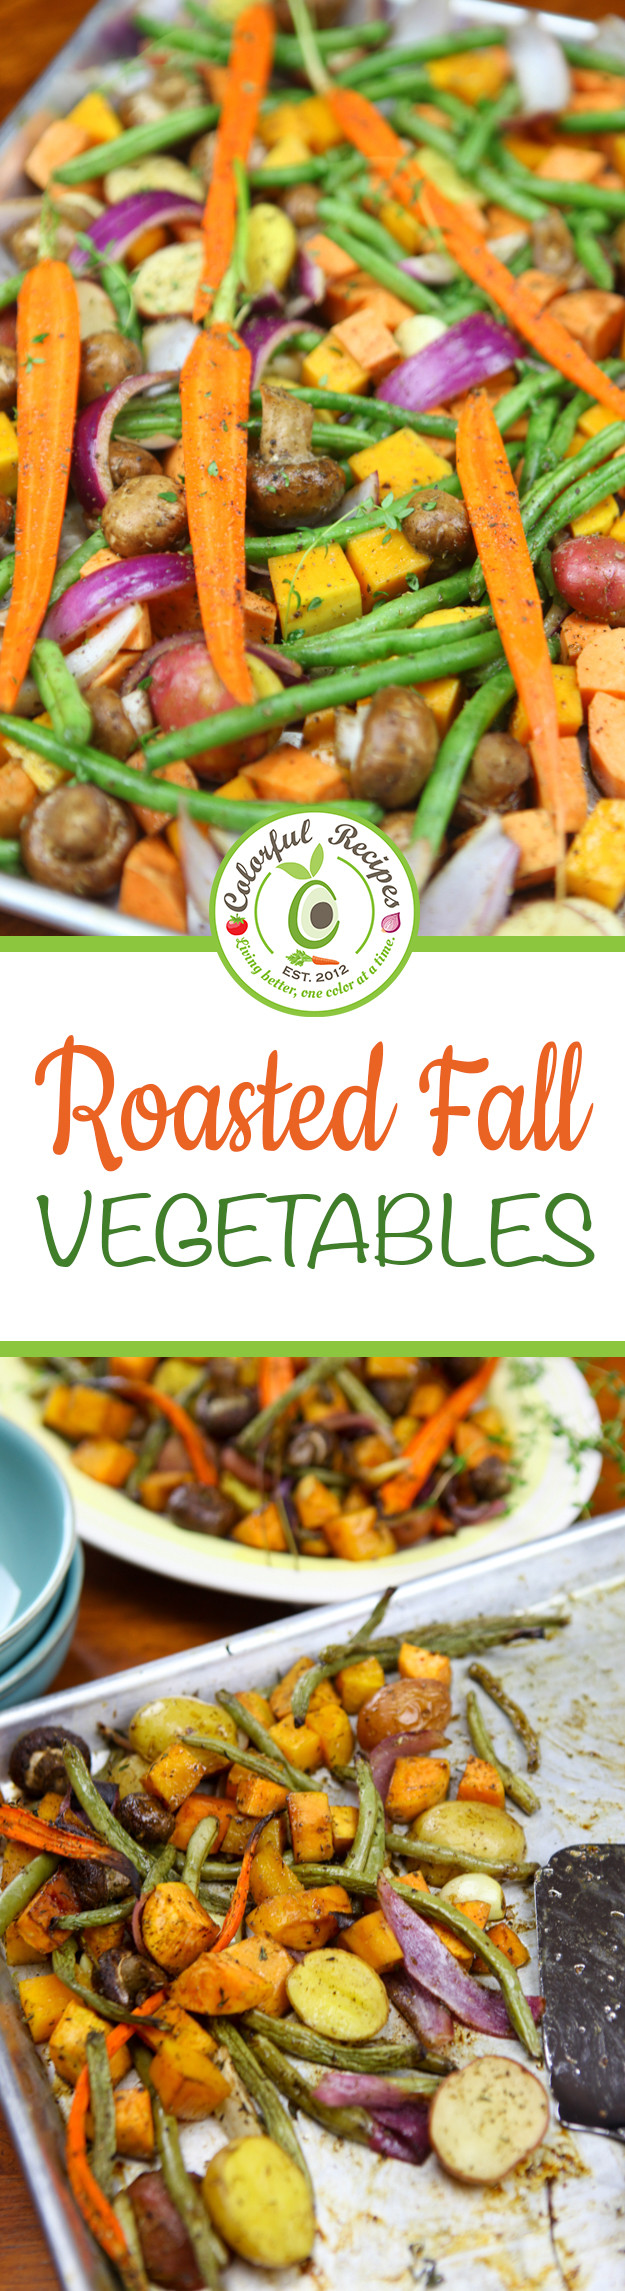 Roasted Fall Vegetables
 Roasted Fall Ve ables Colorful Recipes